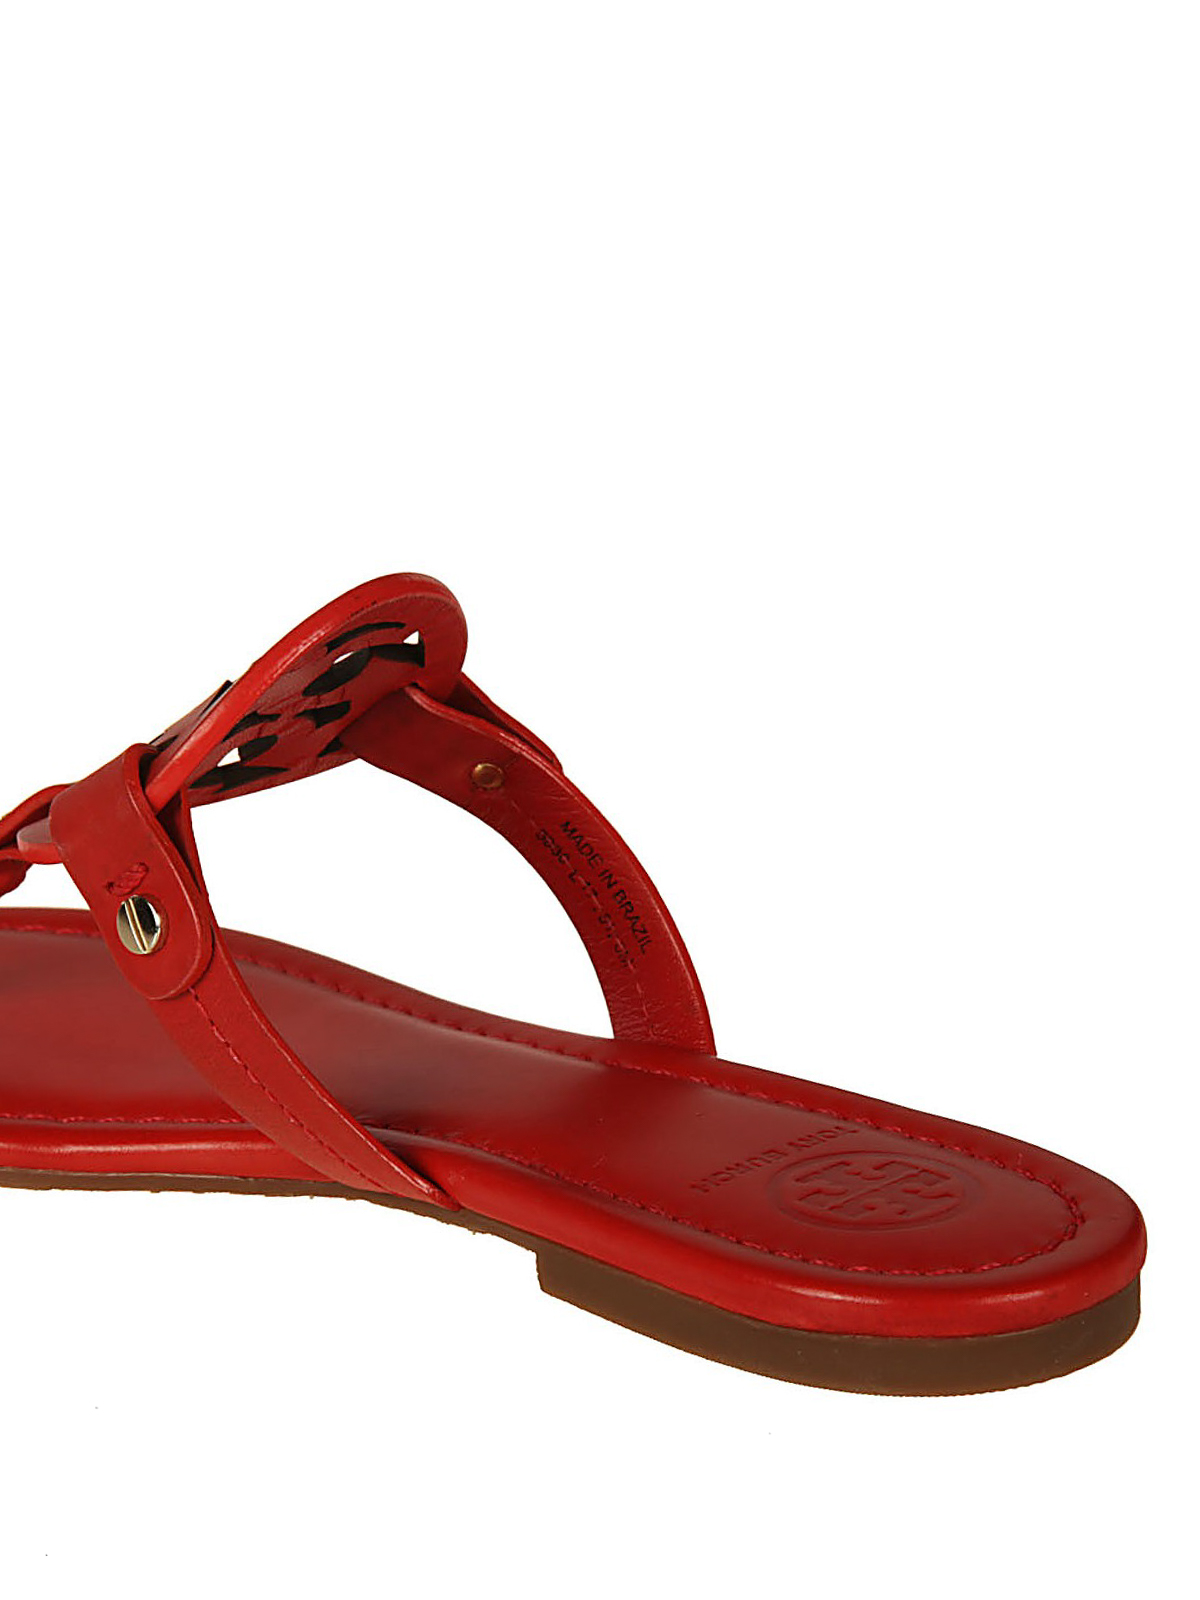 Sandals Tory Burch - Miller red leather thong sandals - 36446600